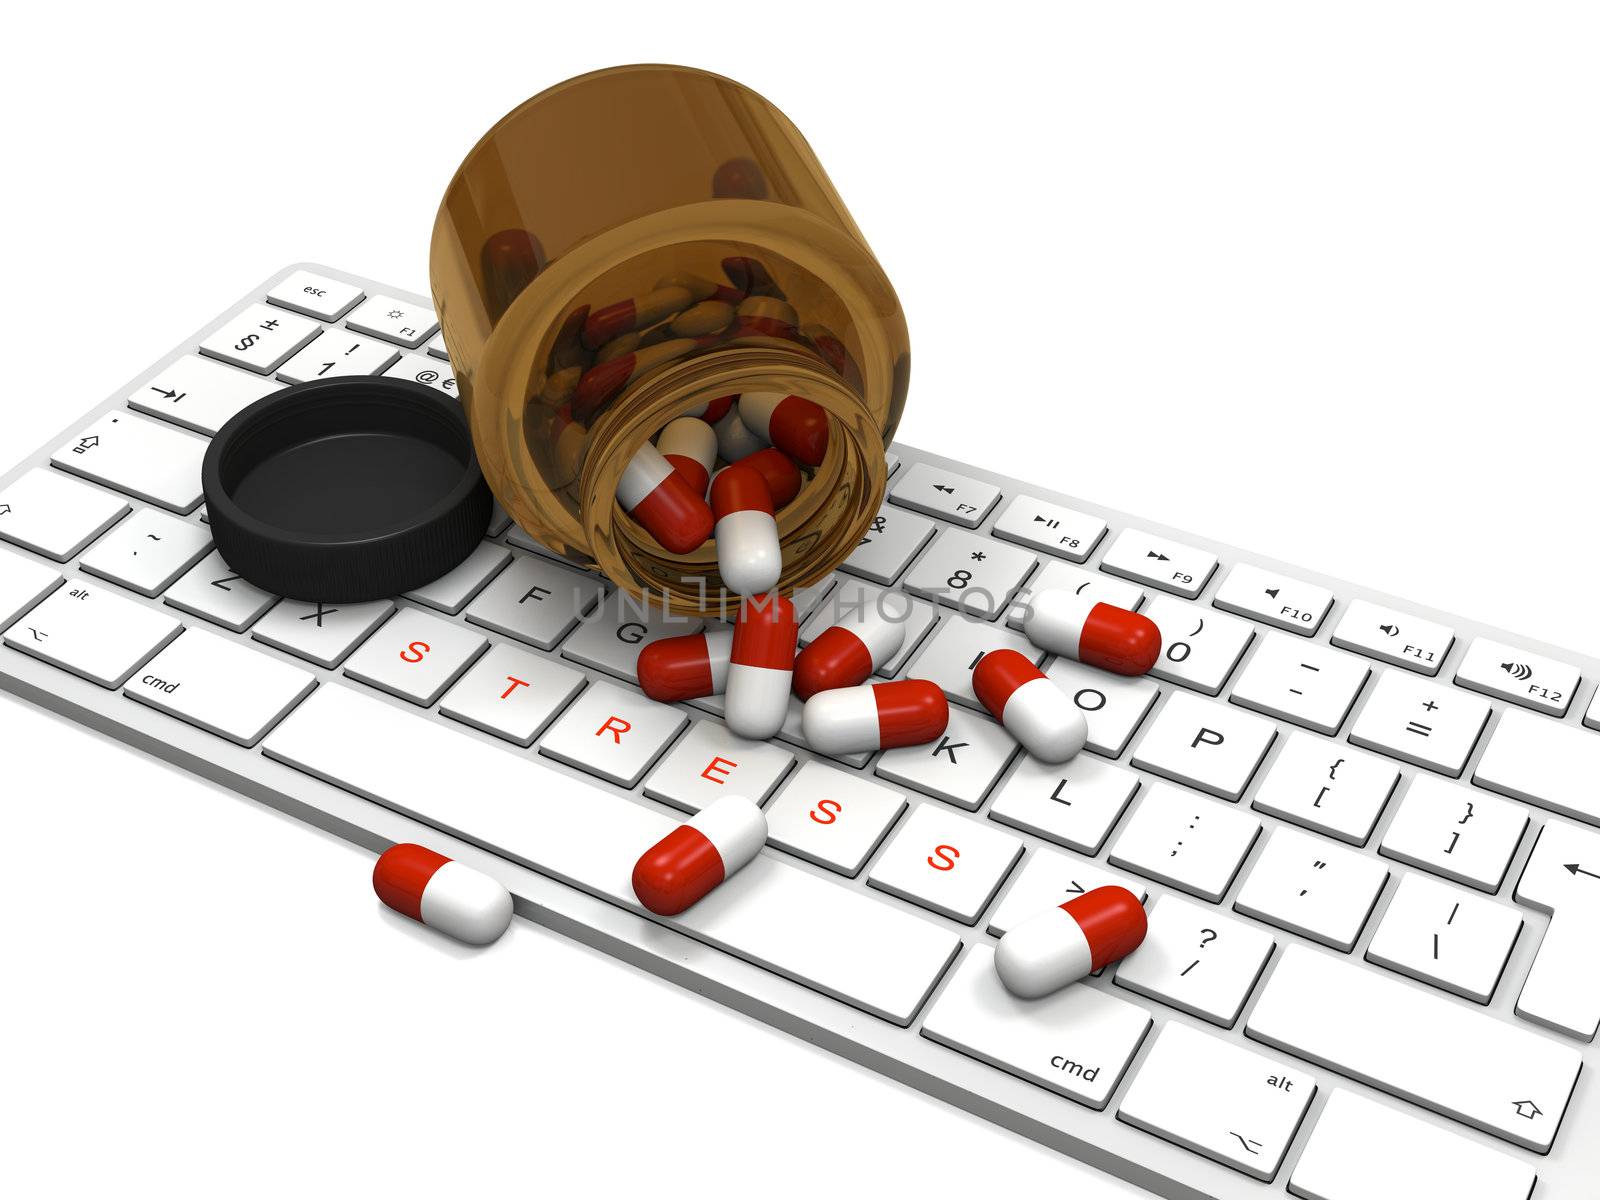 Stress relief pills in opened pill bottle on computer keyboard with word "stress" on keyboard keys